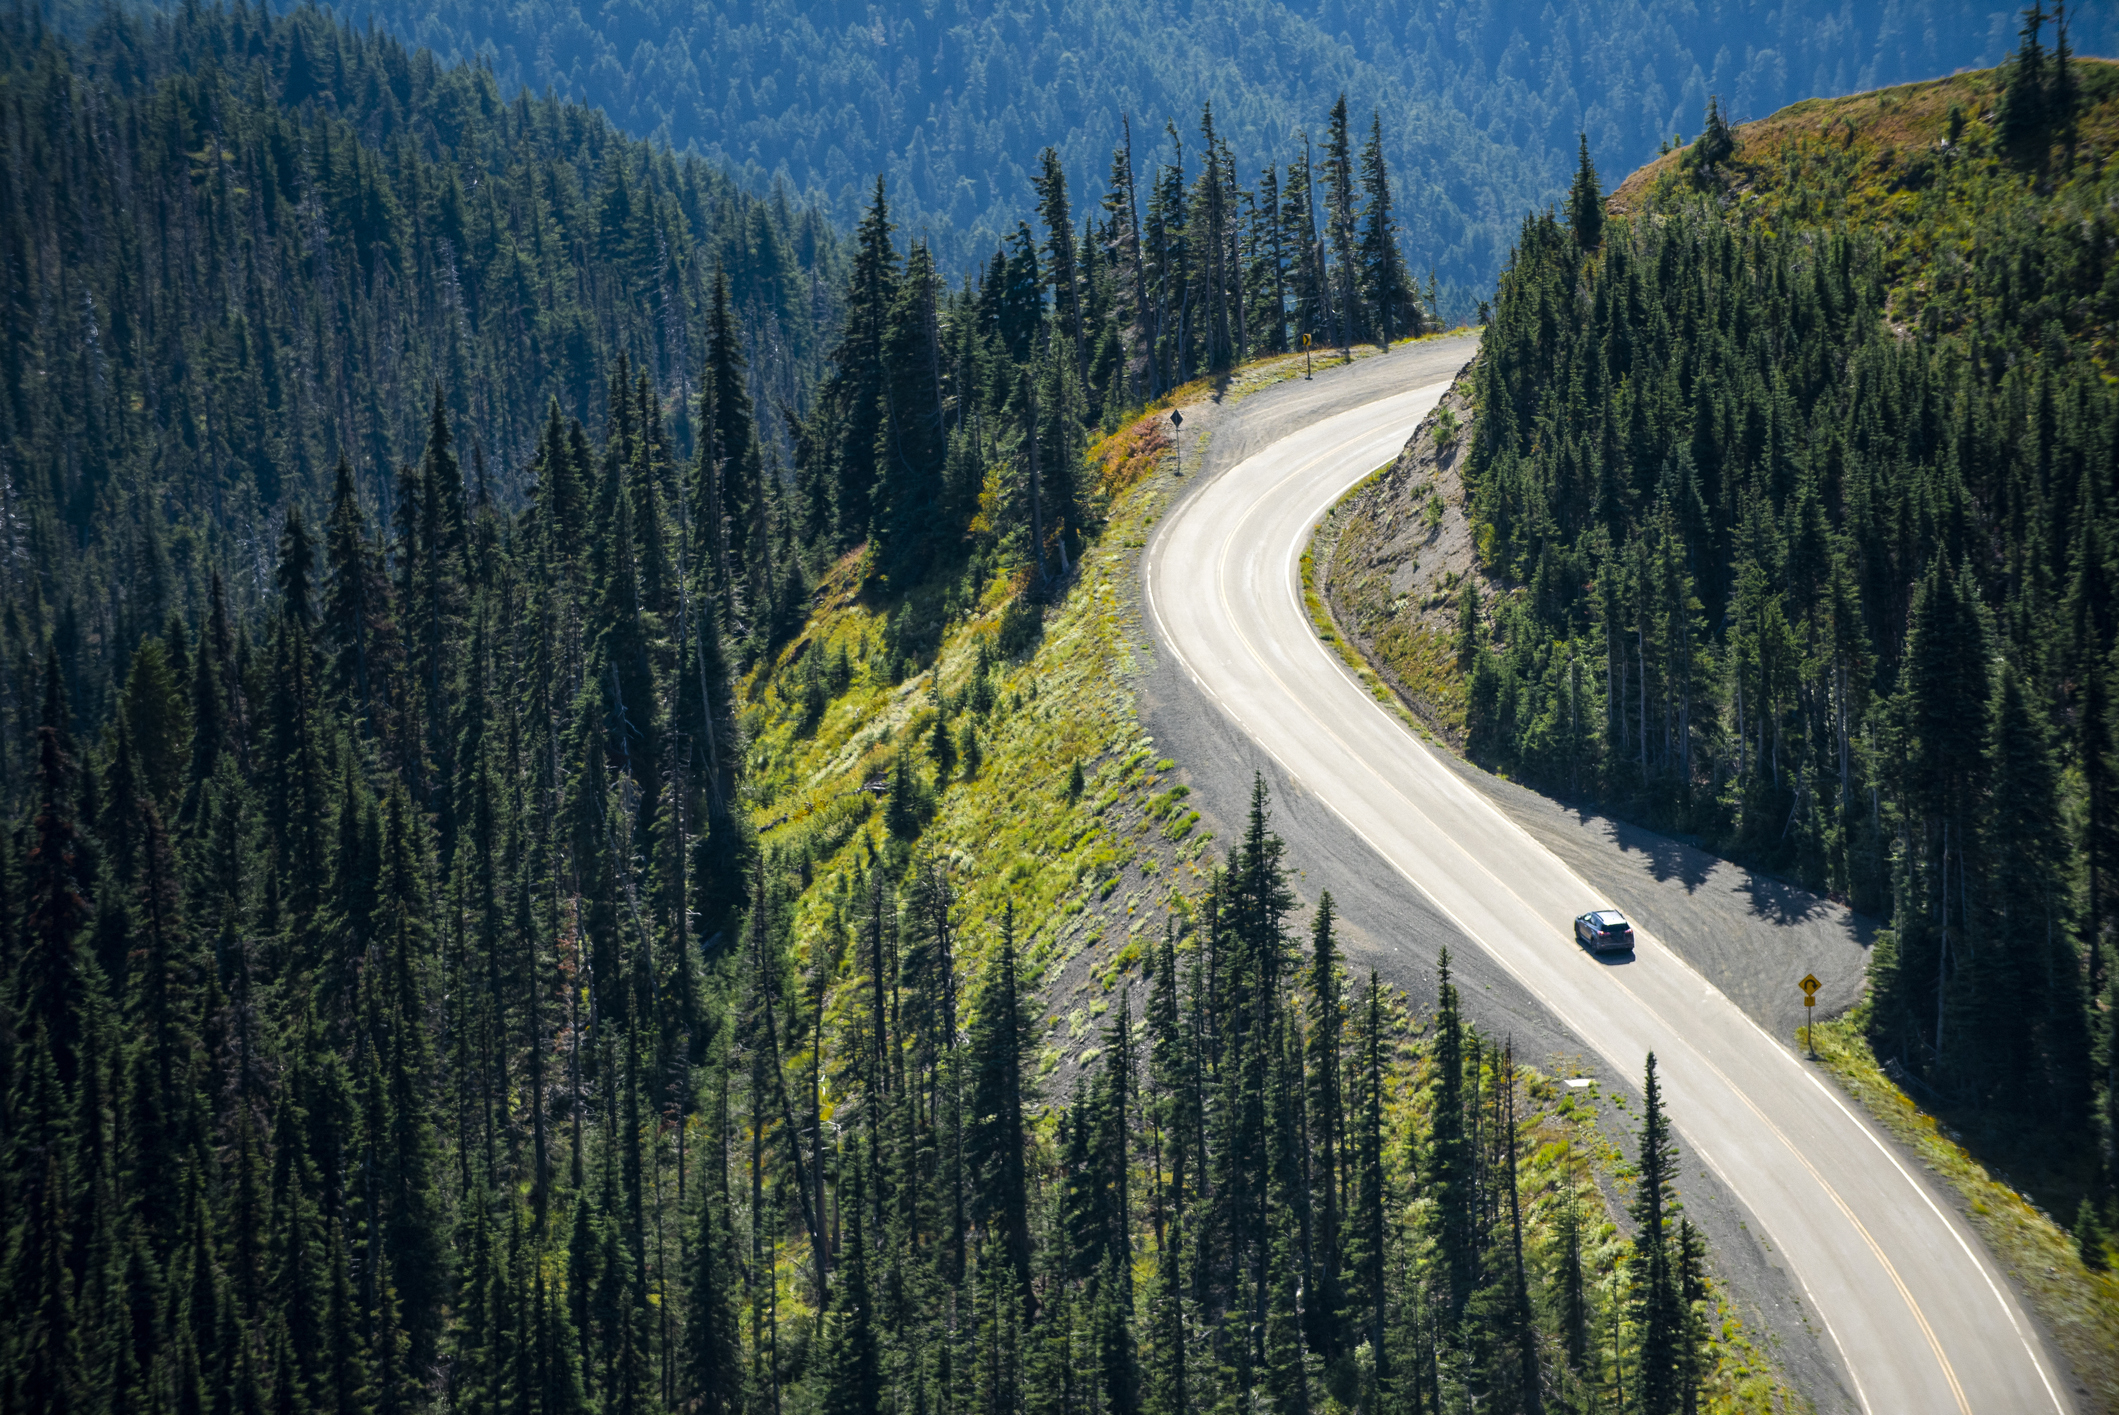 Cars on the Olympic National Park road in Washington state